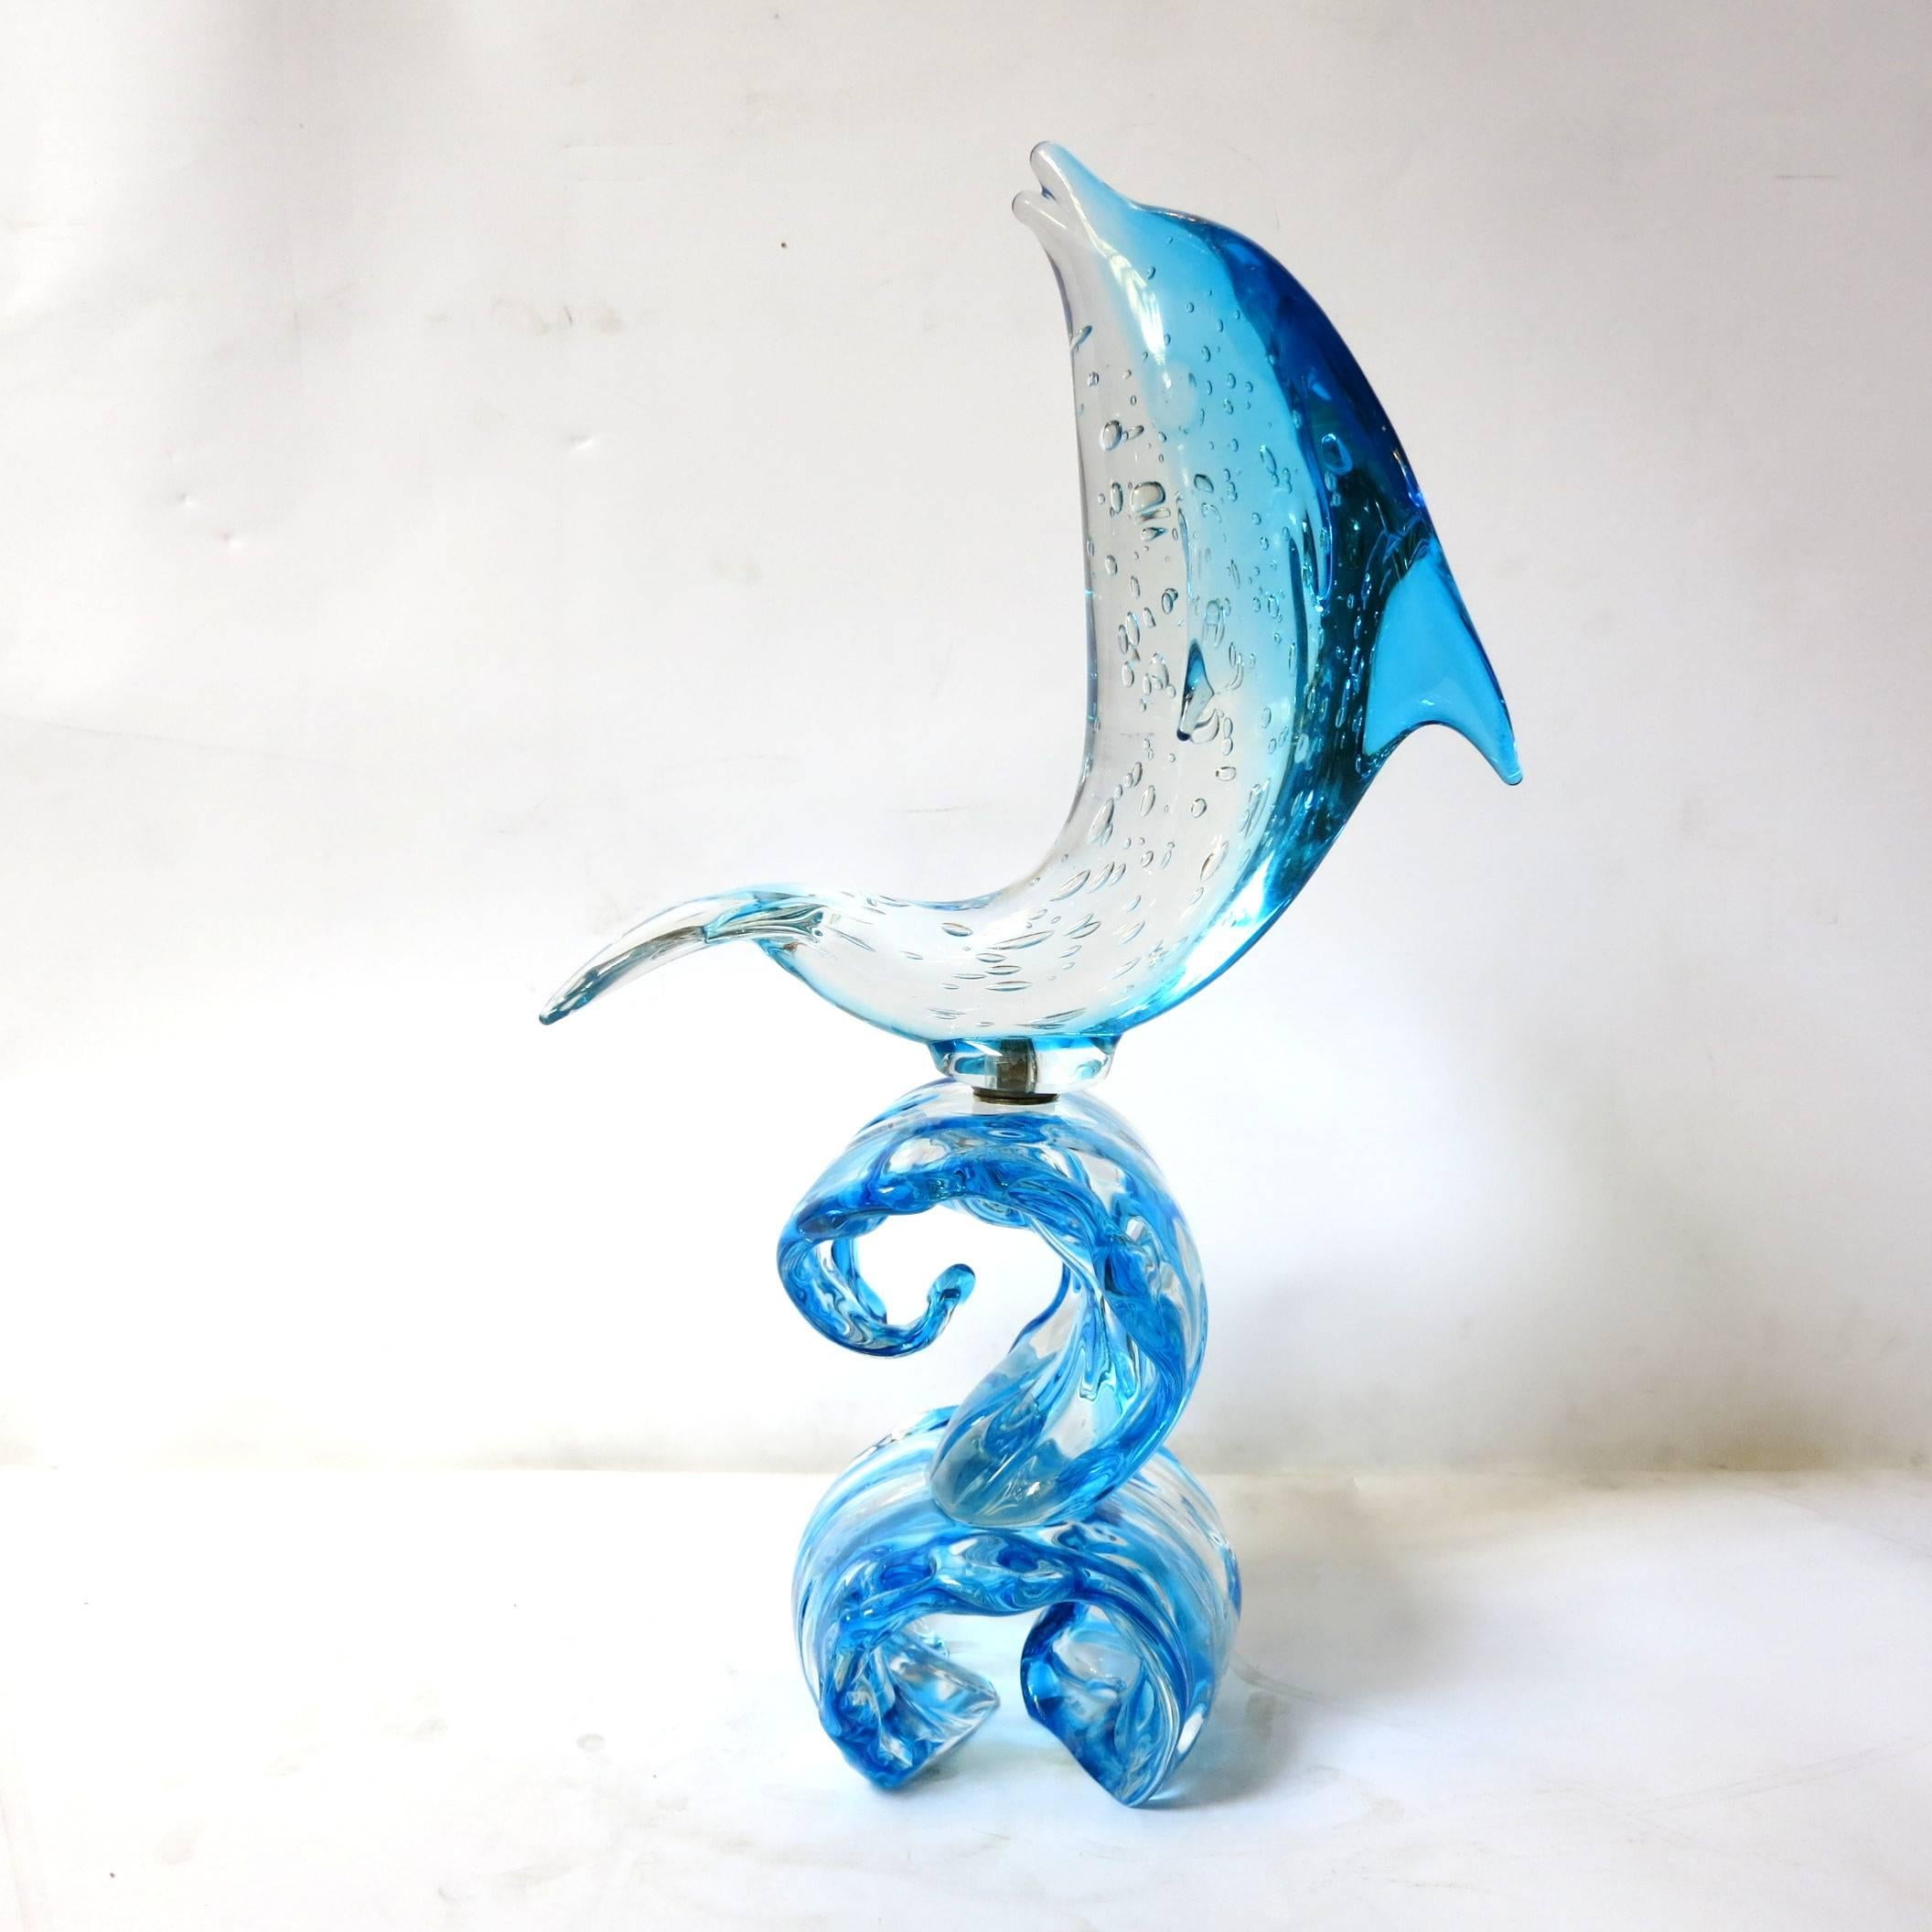 Dolphin on Wave Murano Glass Sculpture by Sergio Costantini (Italienisch)